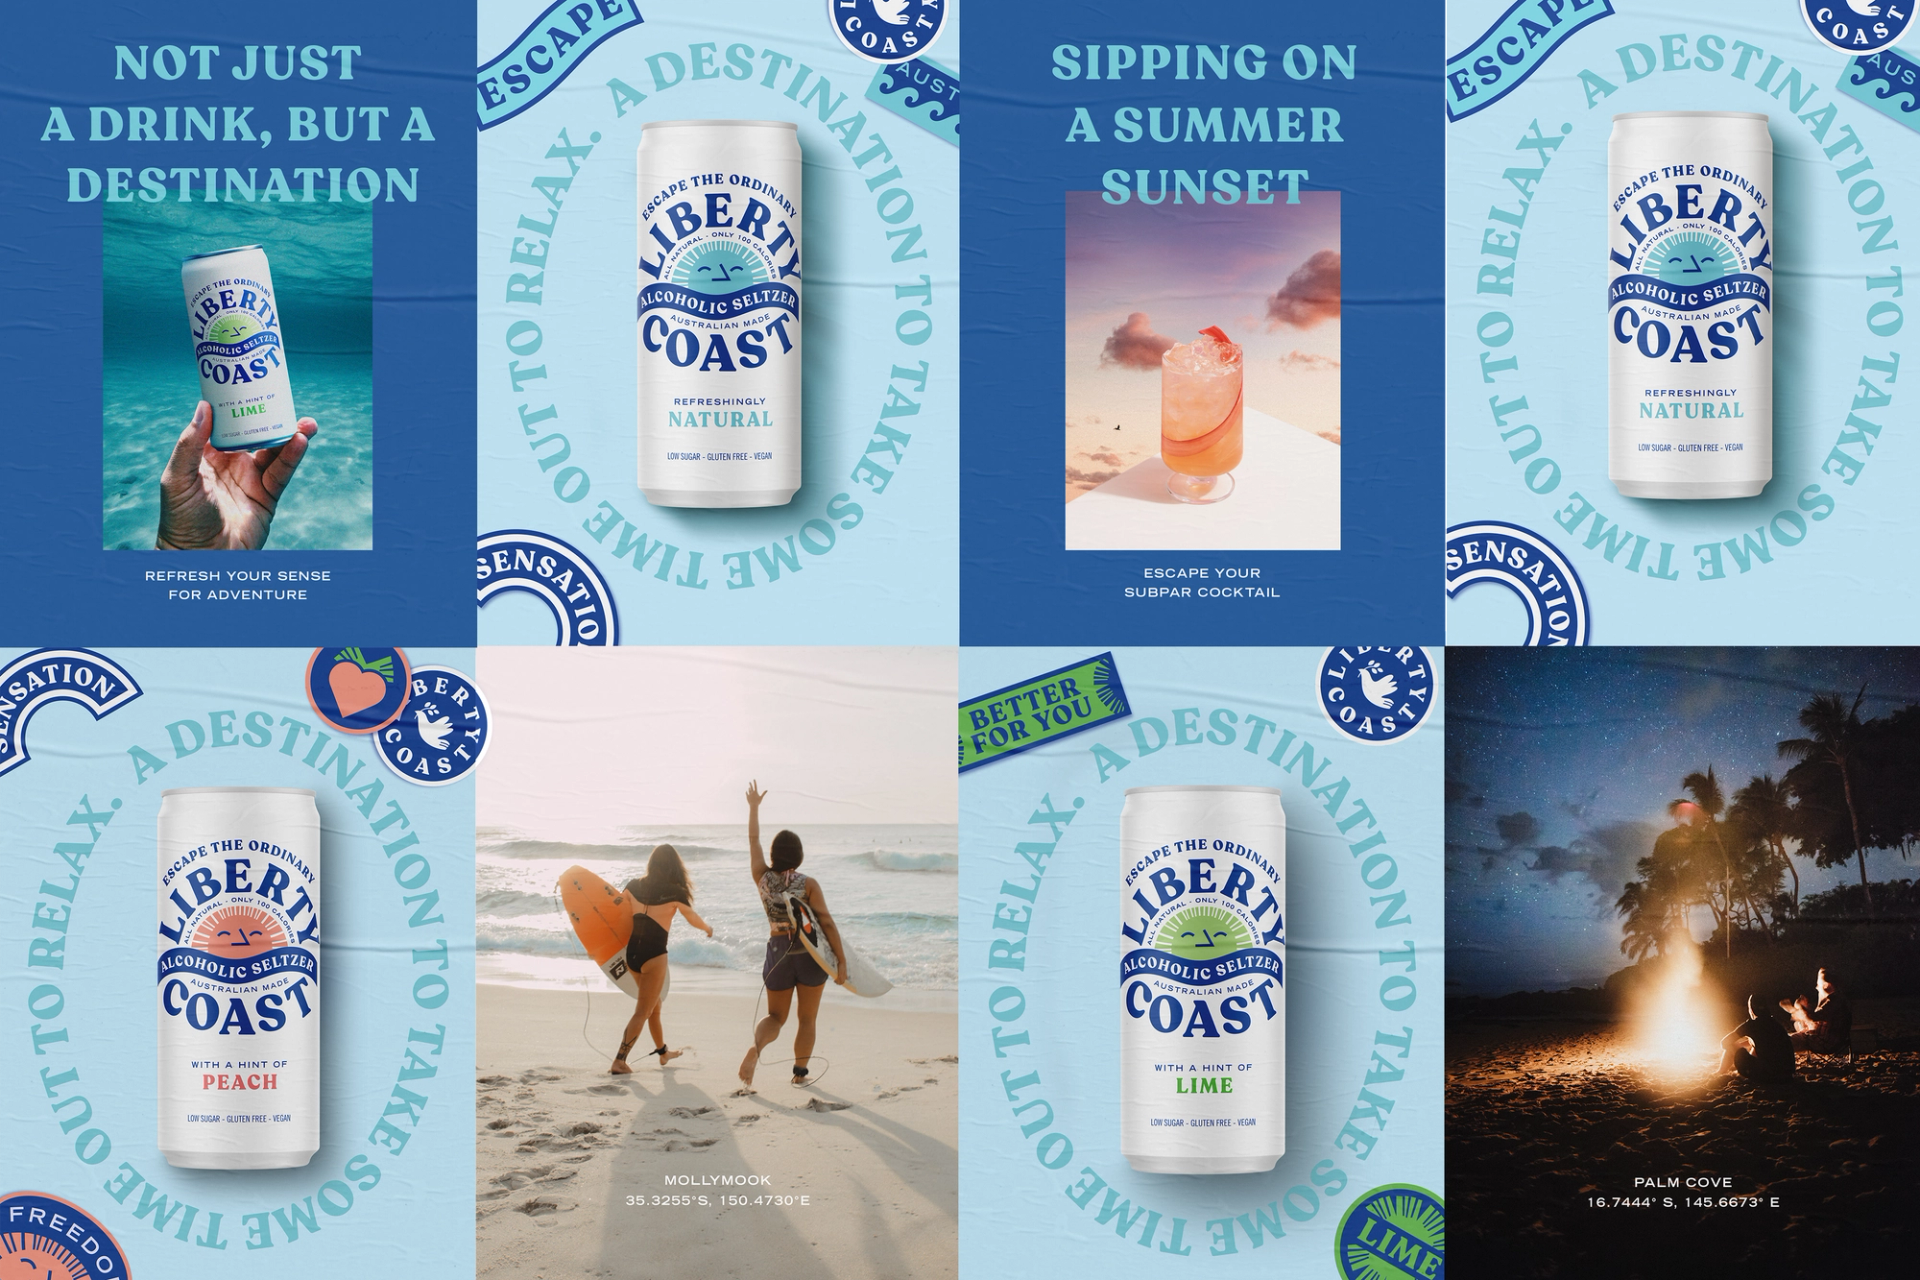 Collage of branding design collateral by brand design agency Our Revolution for alcoholic seltzer brand Liberty Coast